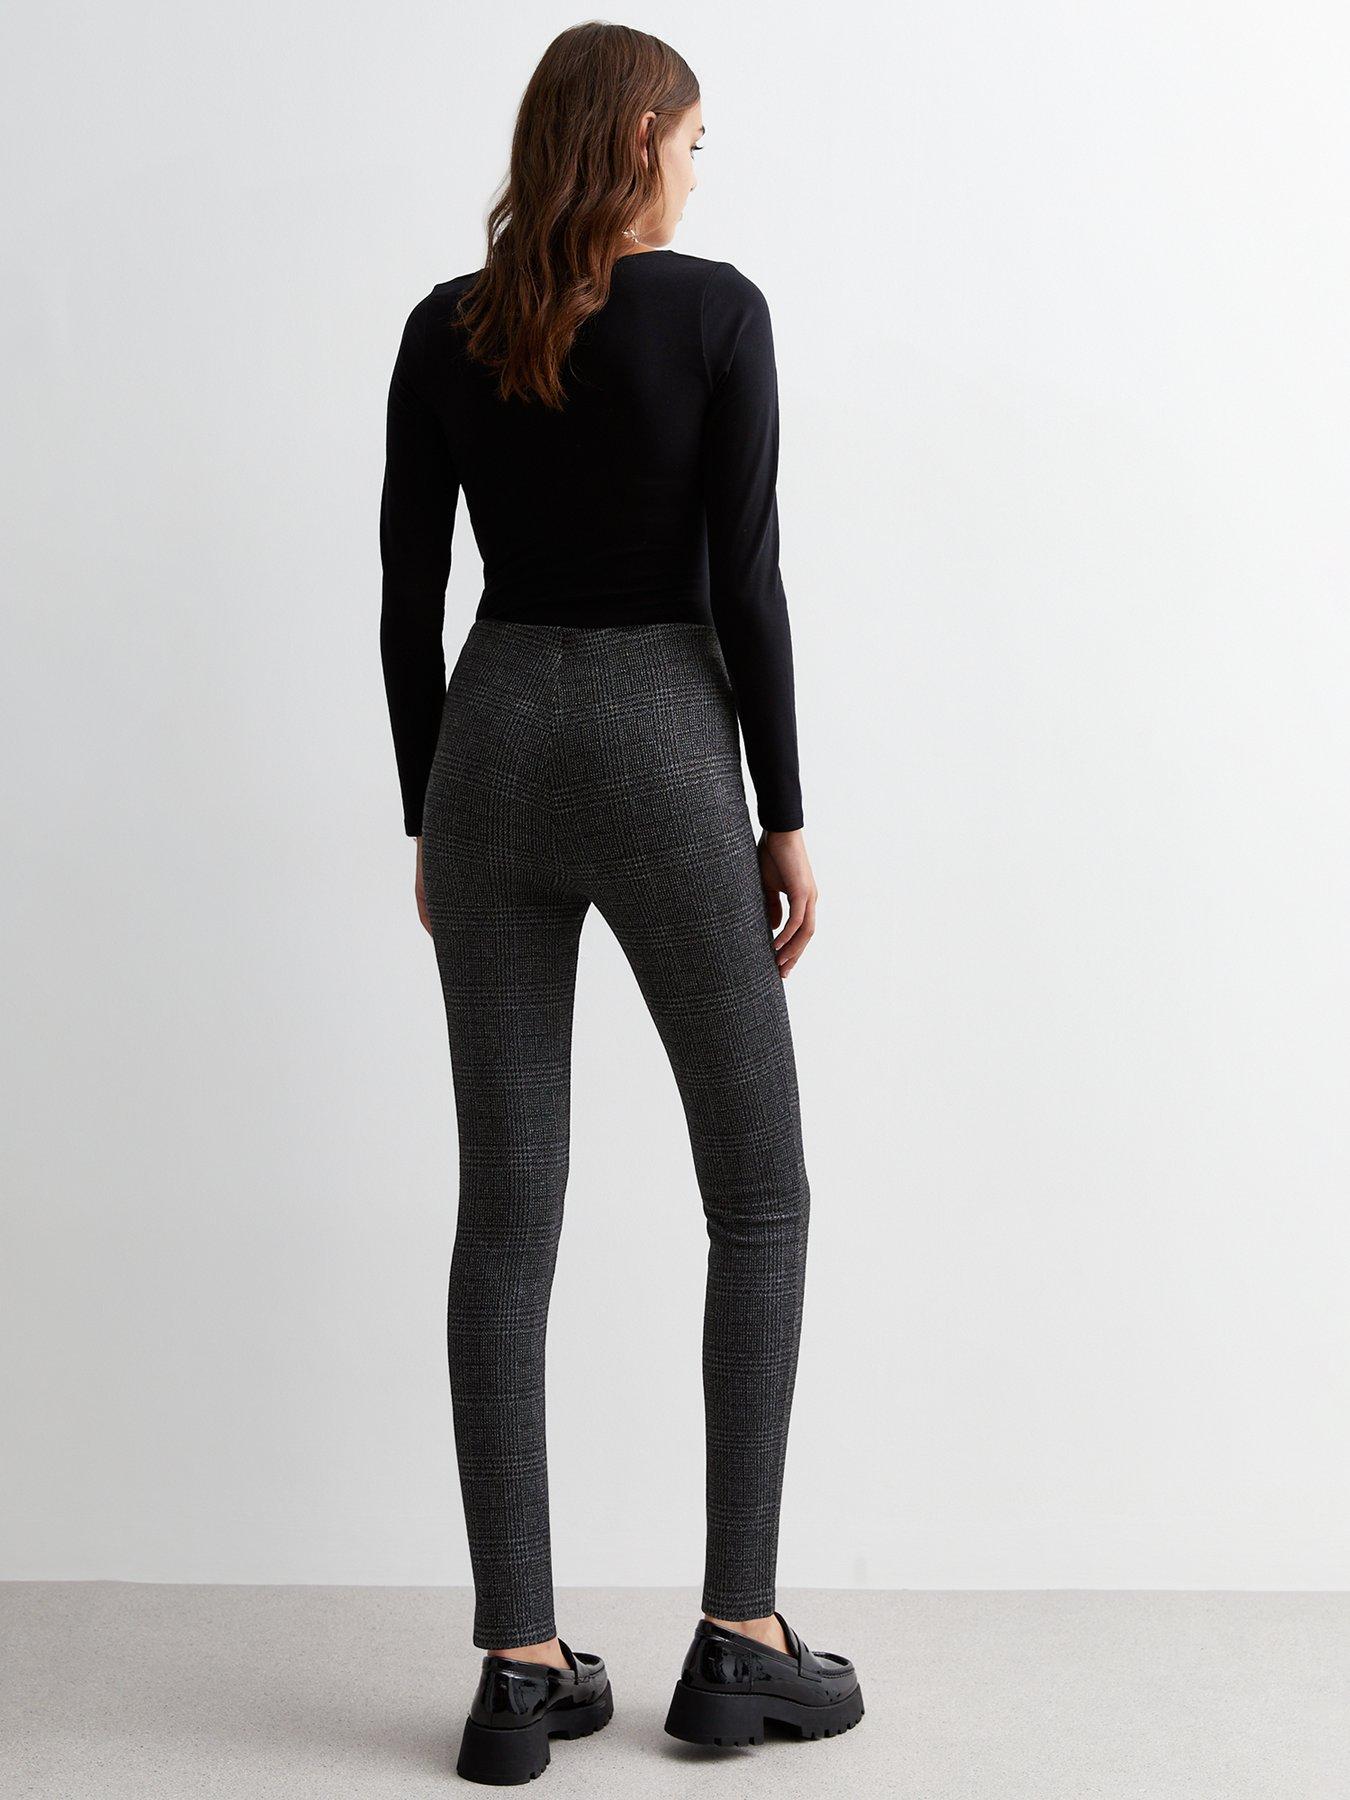 Only Exclusive leggings in gray check